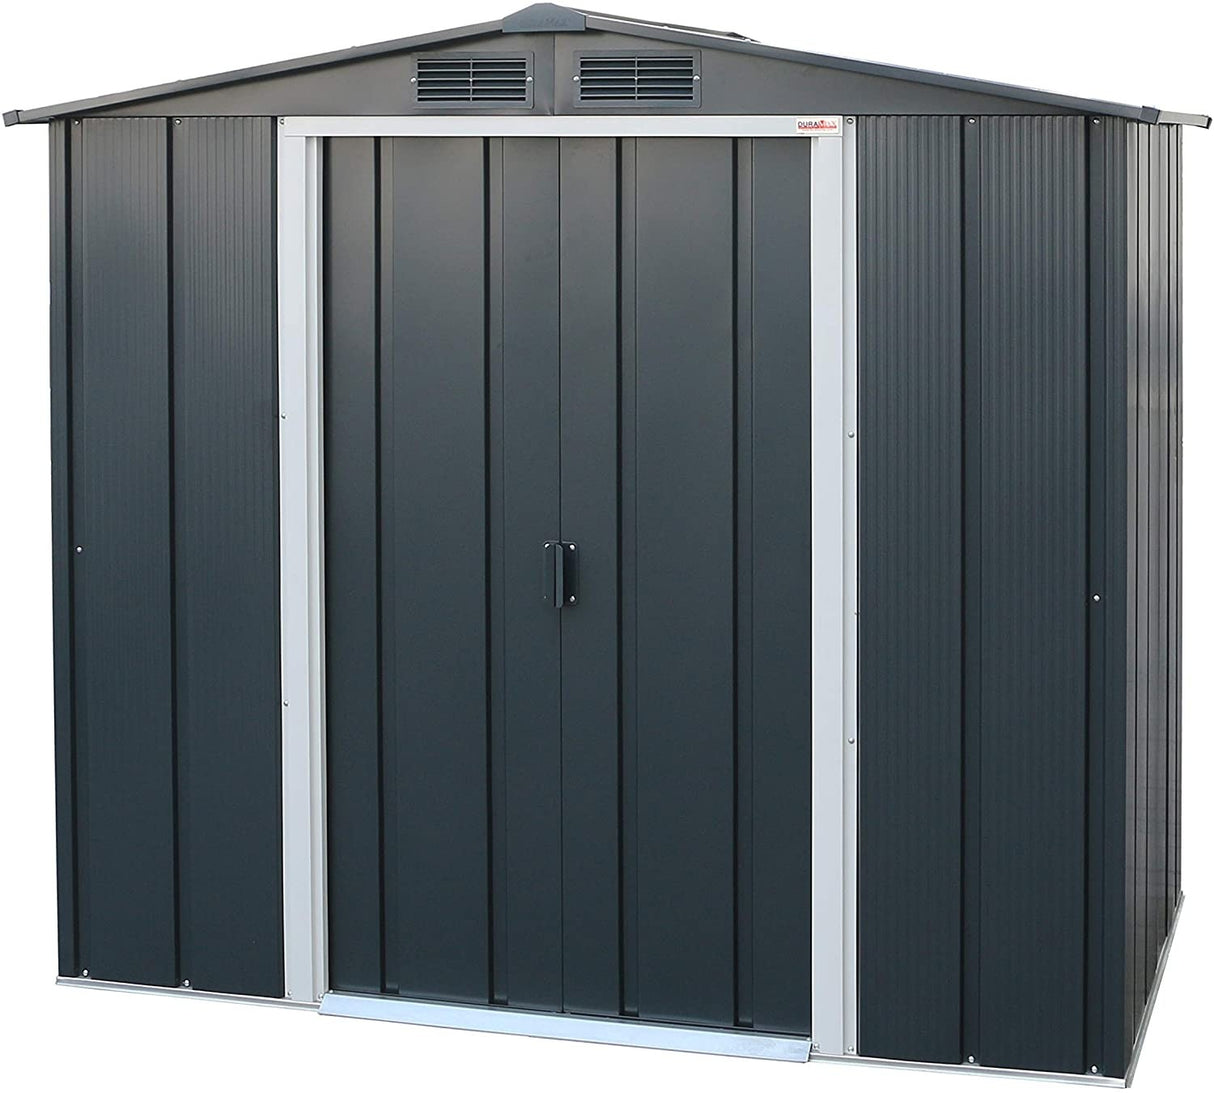 Sapphire 6x4 Metal Shed in Grey